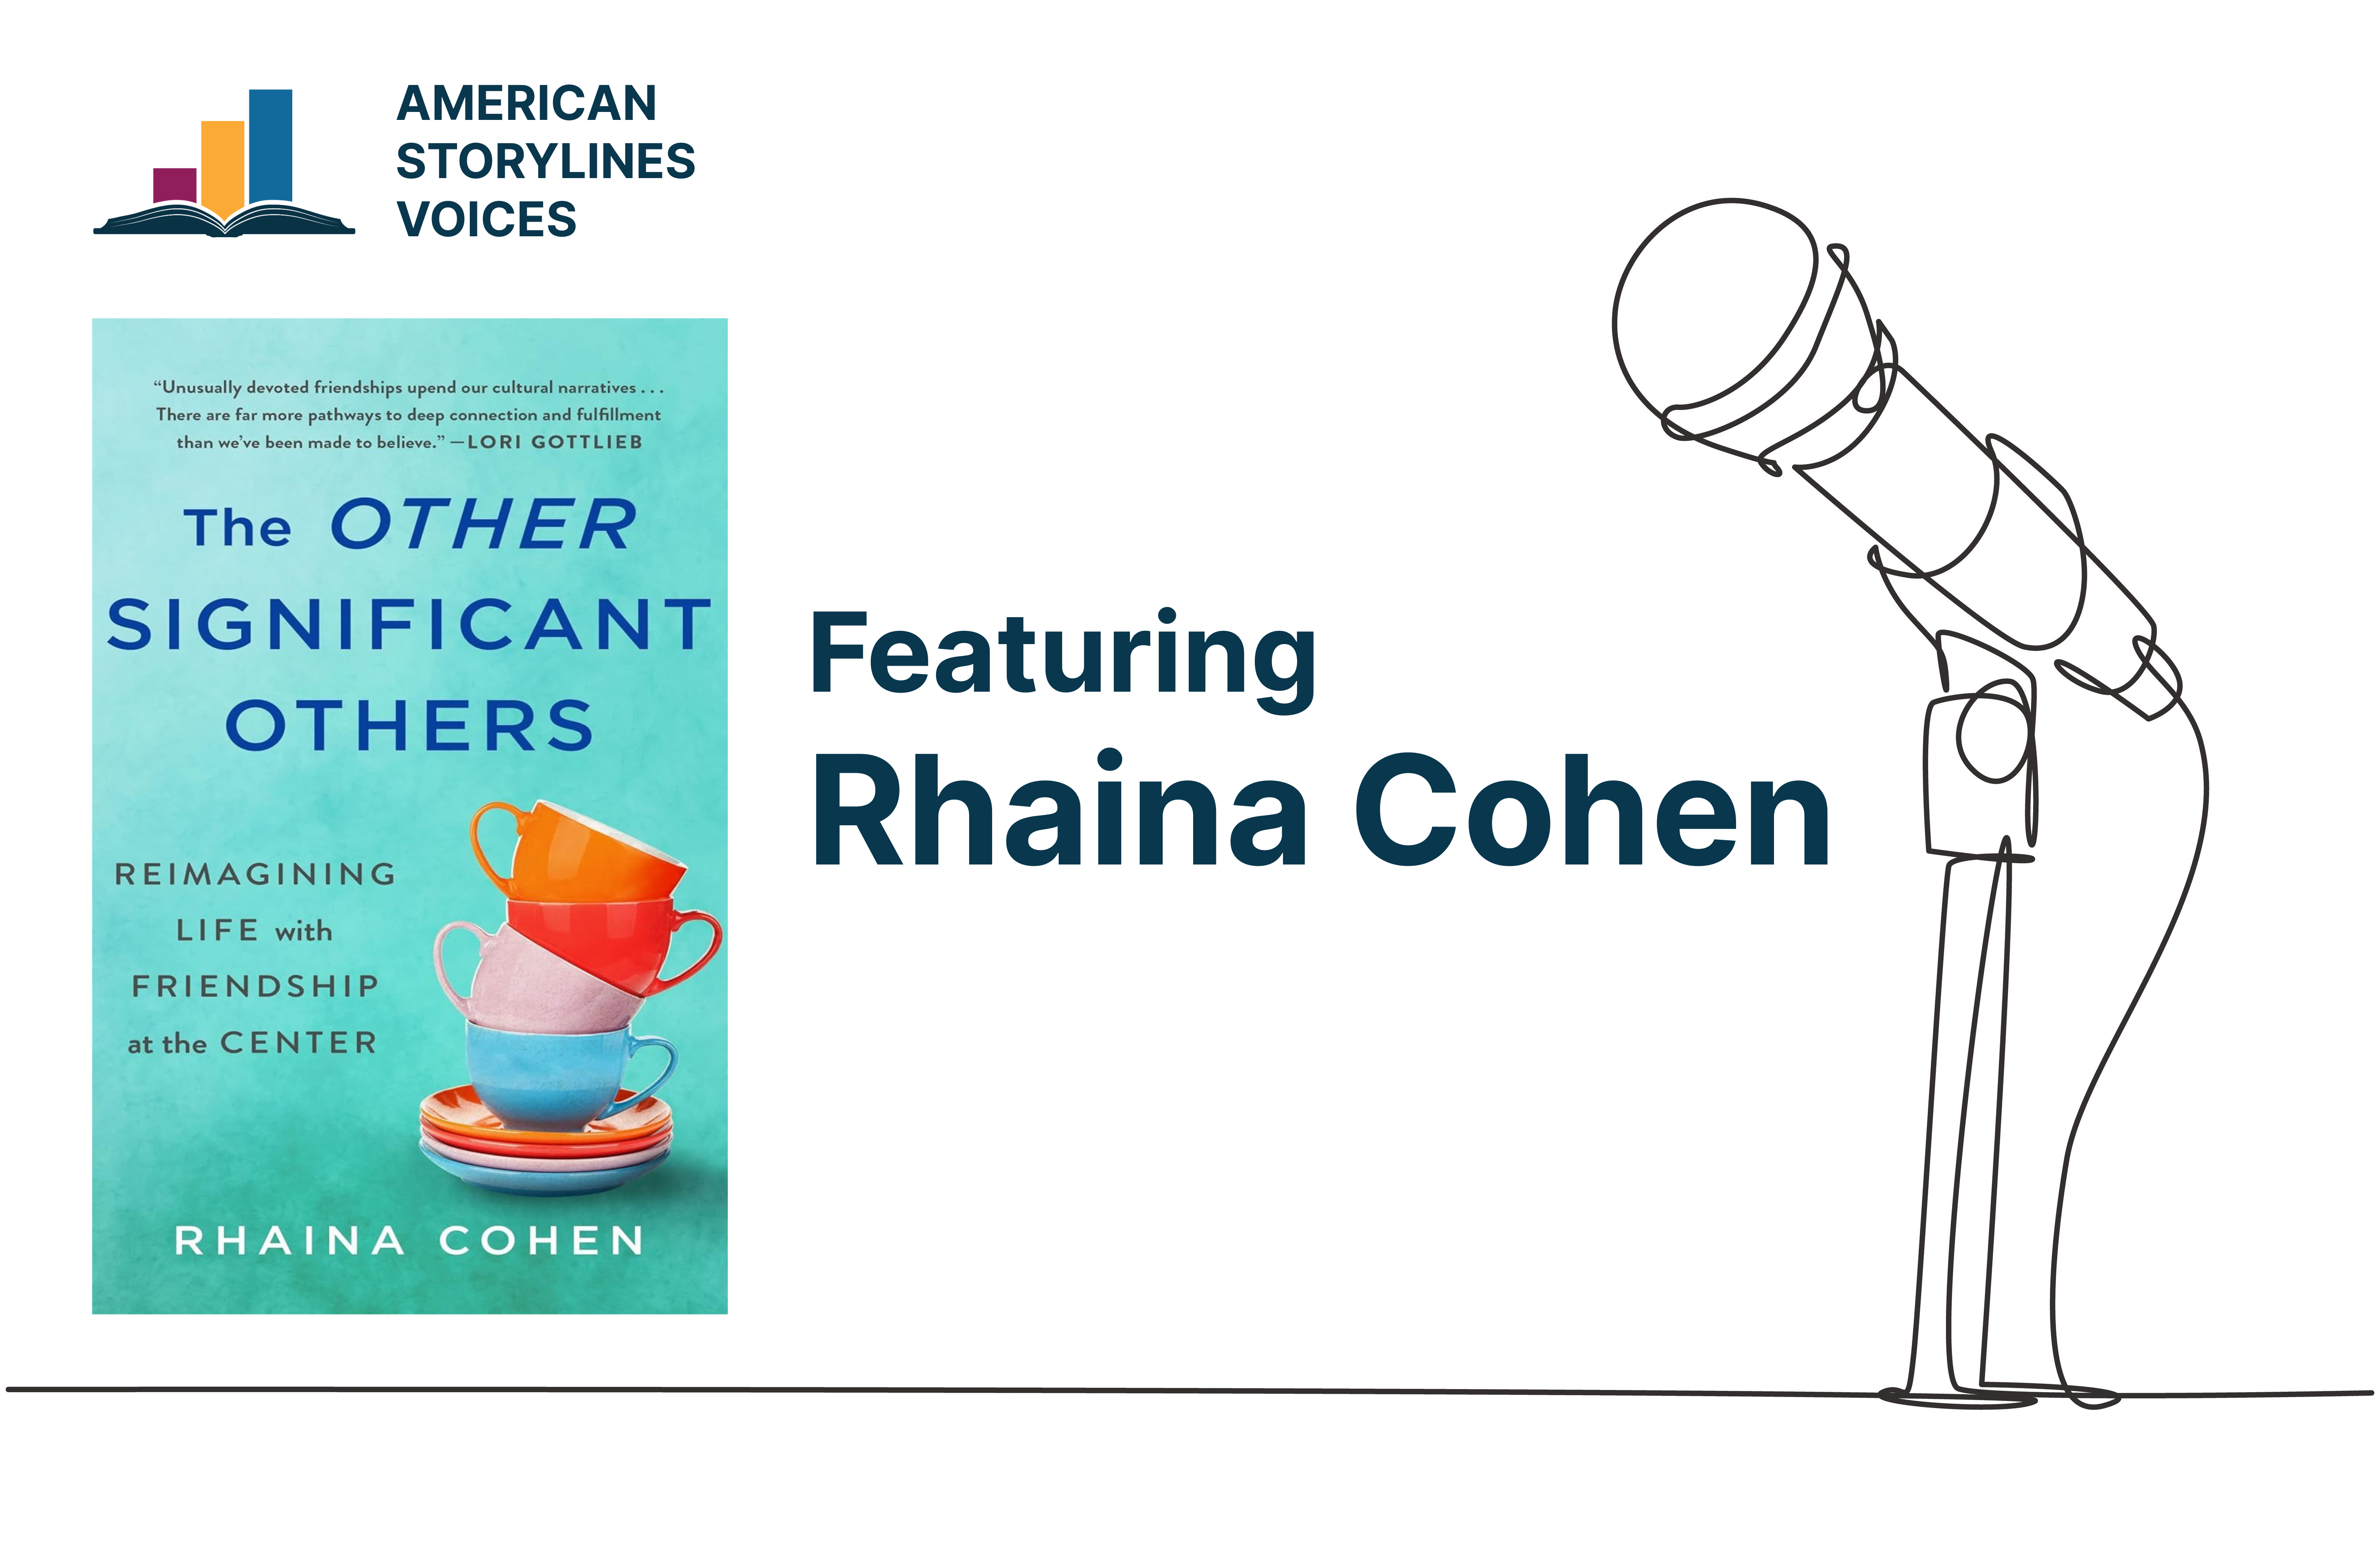 American Storylines Voices featuring Rhaina Cohen